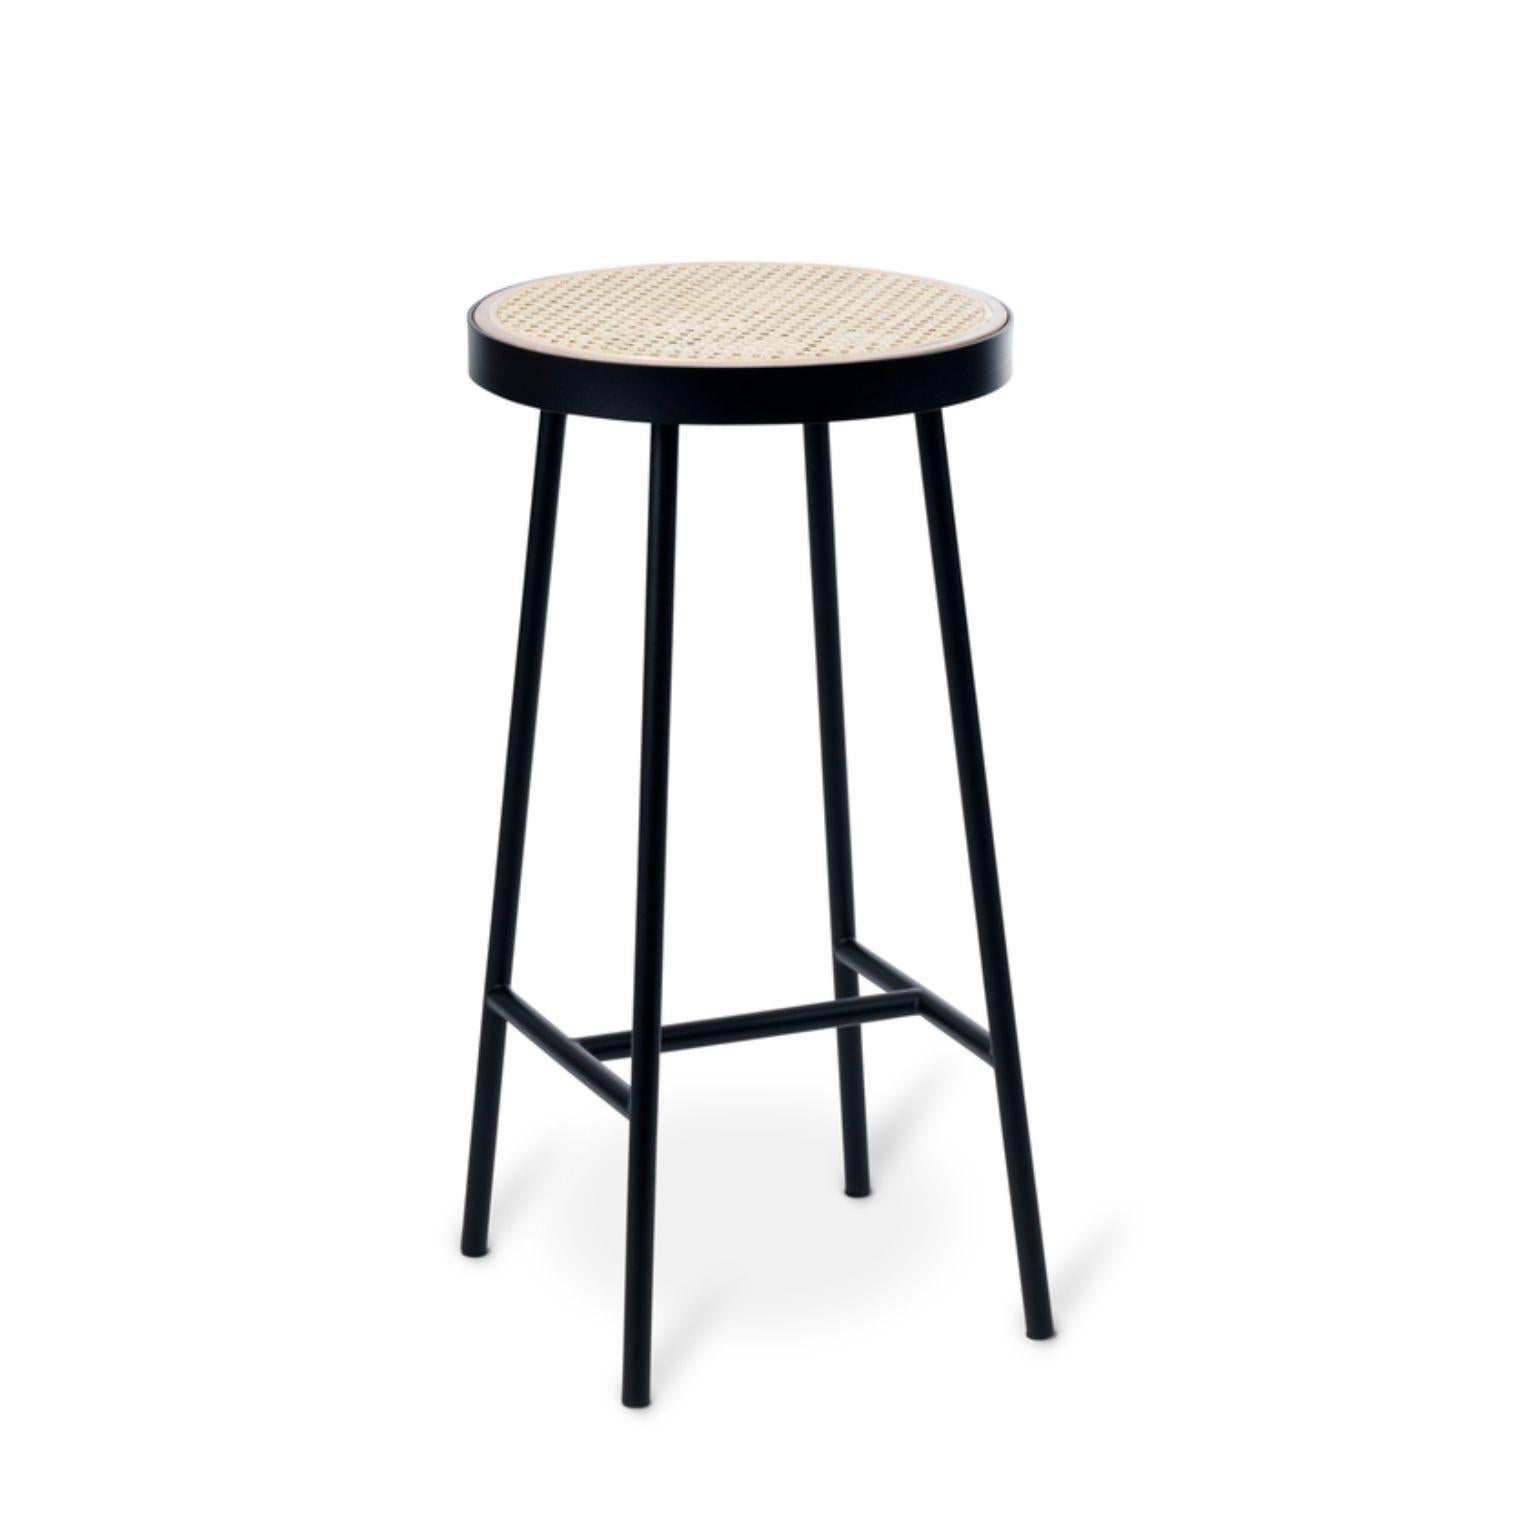 Be My Guest Bar Stool by Warm Nordic
Dimensions: D 38 x H 73 cm
Material: White oiled solid oak, French cane, Black noir powder coated steel frame
Weight: 9.3 kg

Warm Nordic is an ambitious design brand anchored in Nordic design history and